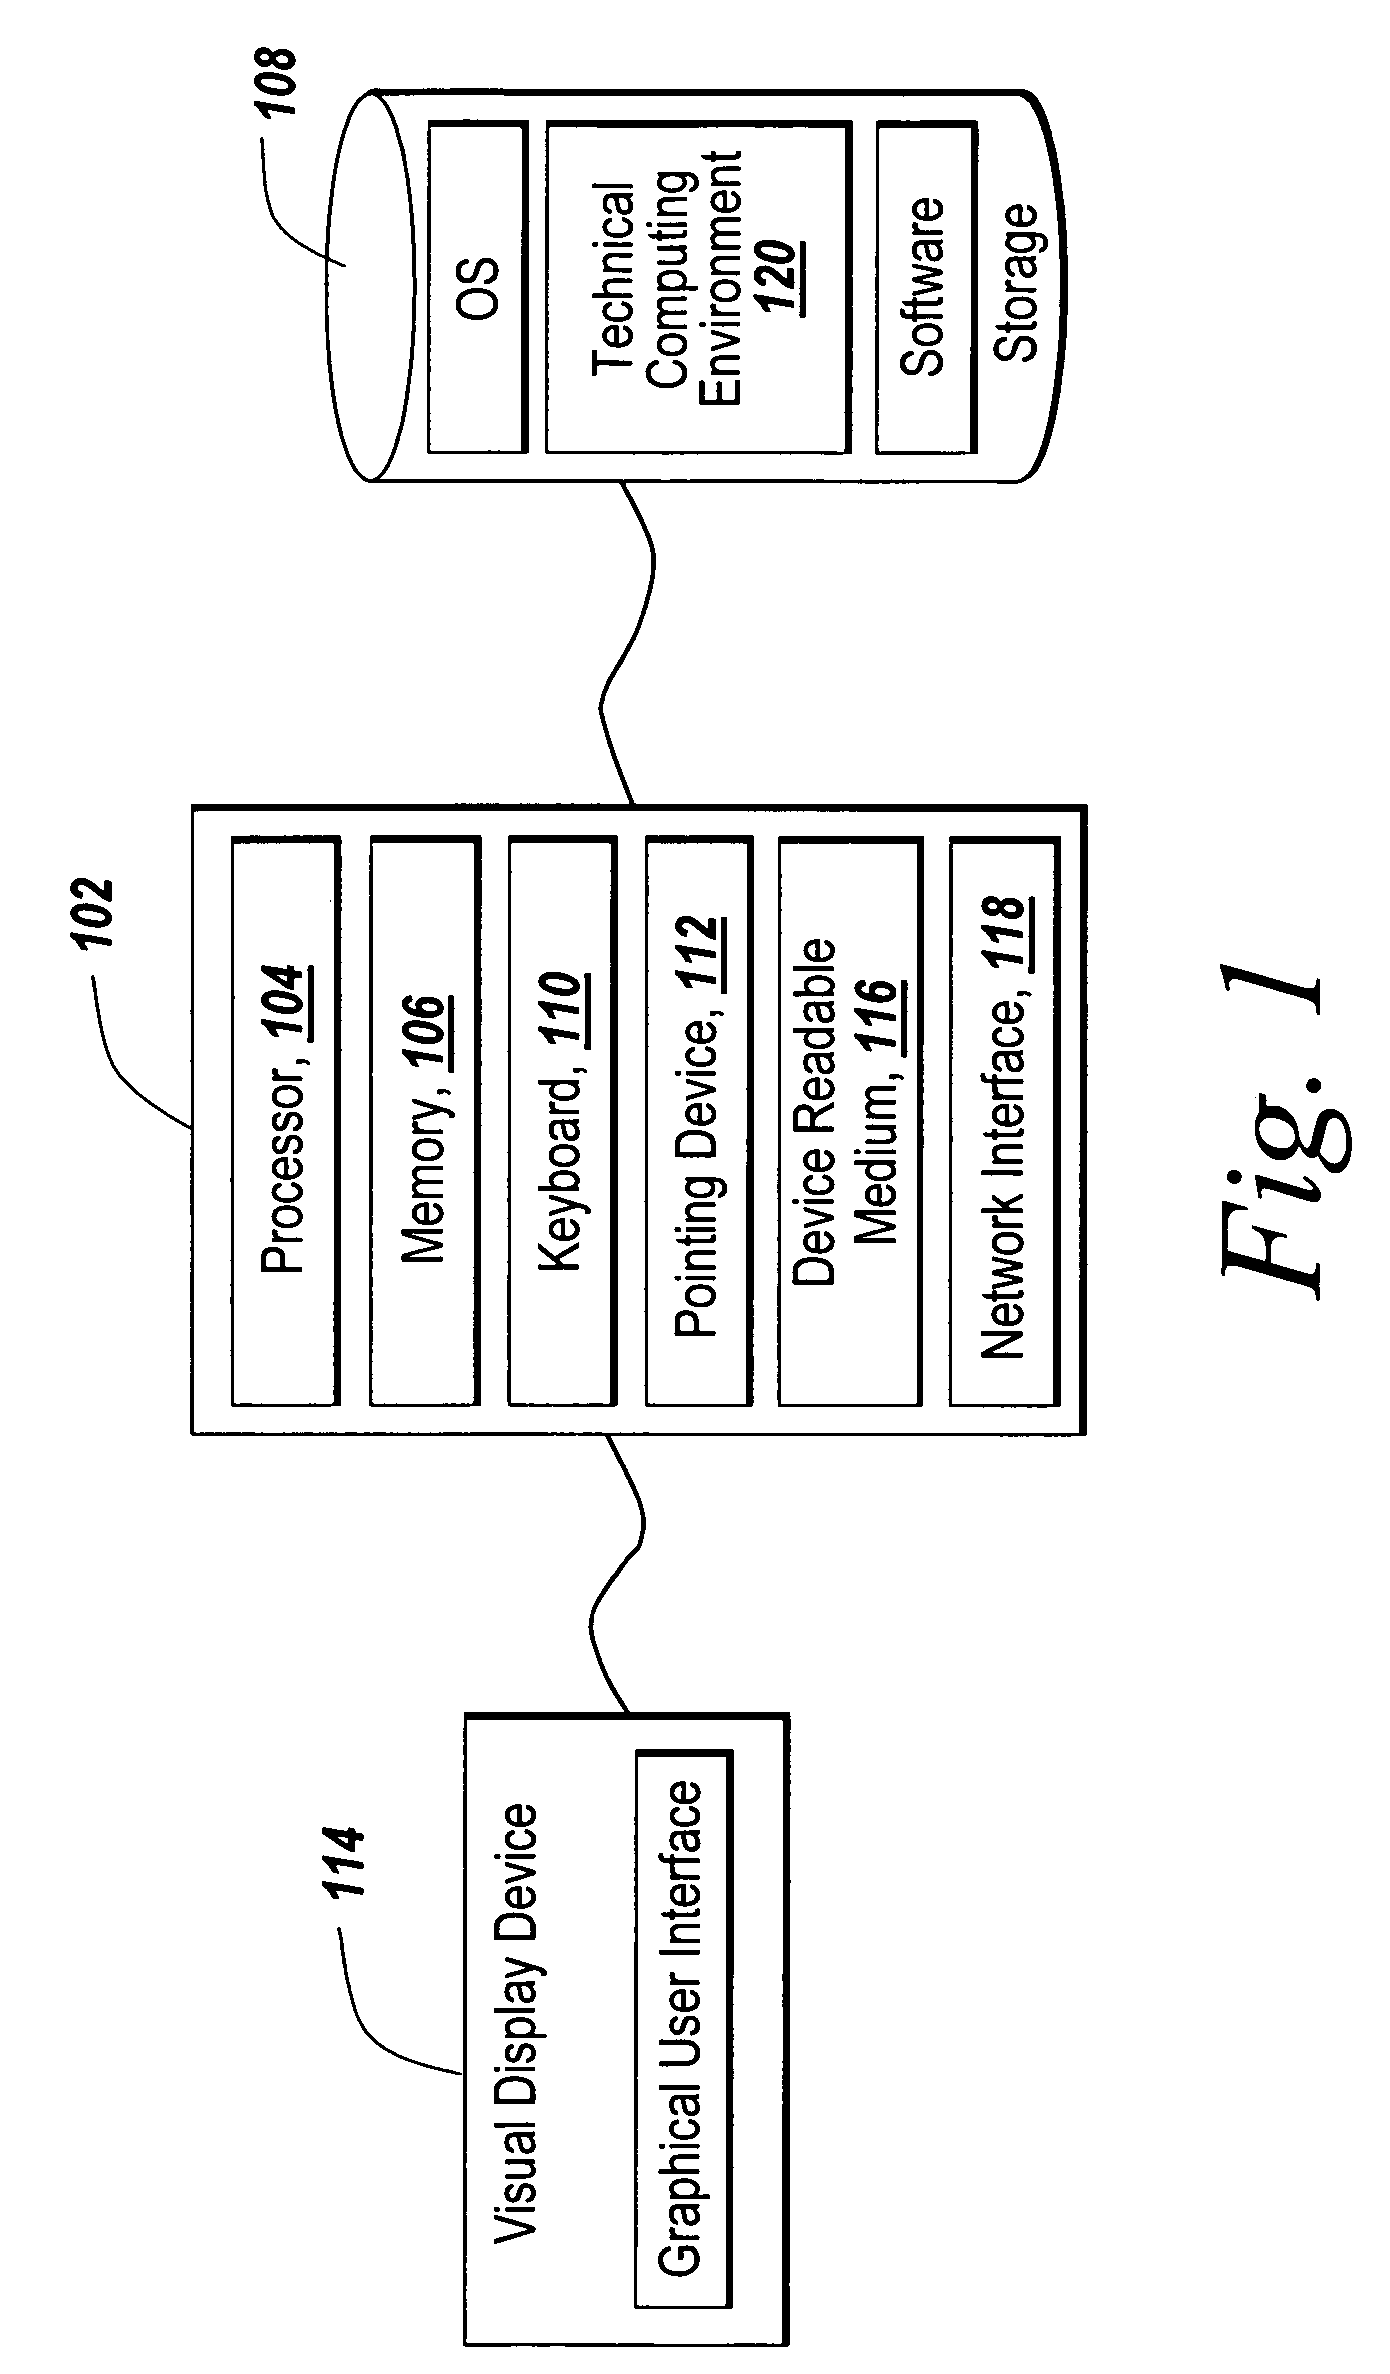 Memory mapping for single and multi-processing implementations of code generated from a block diagram model